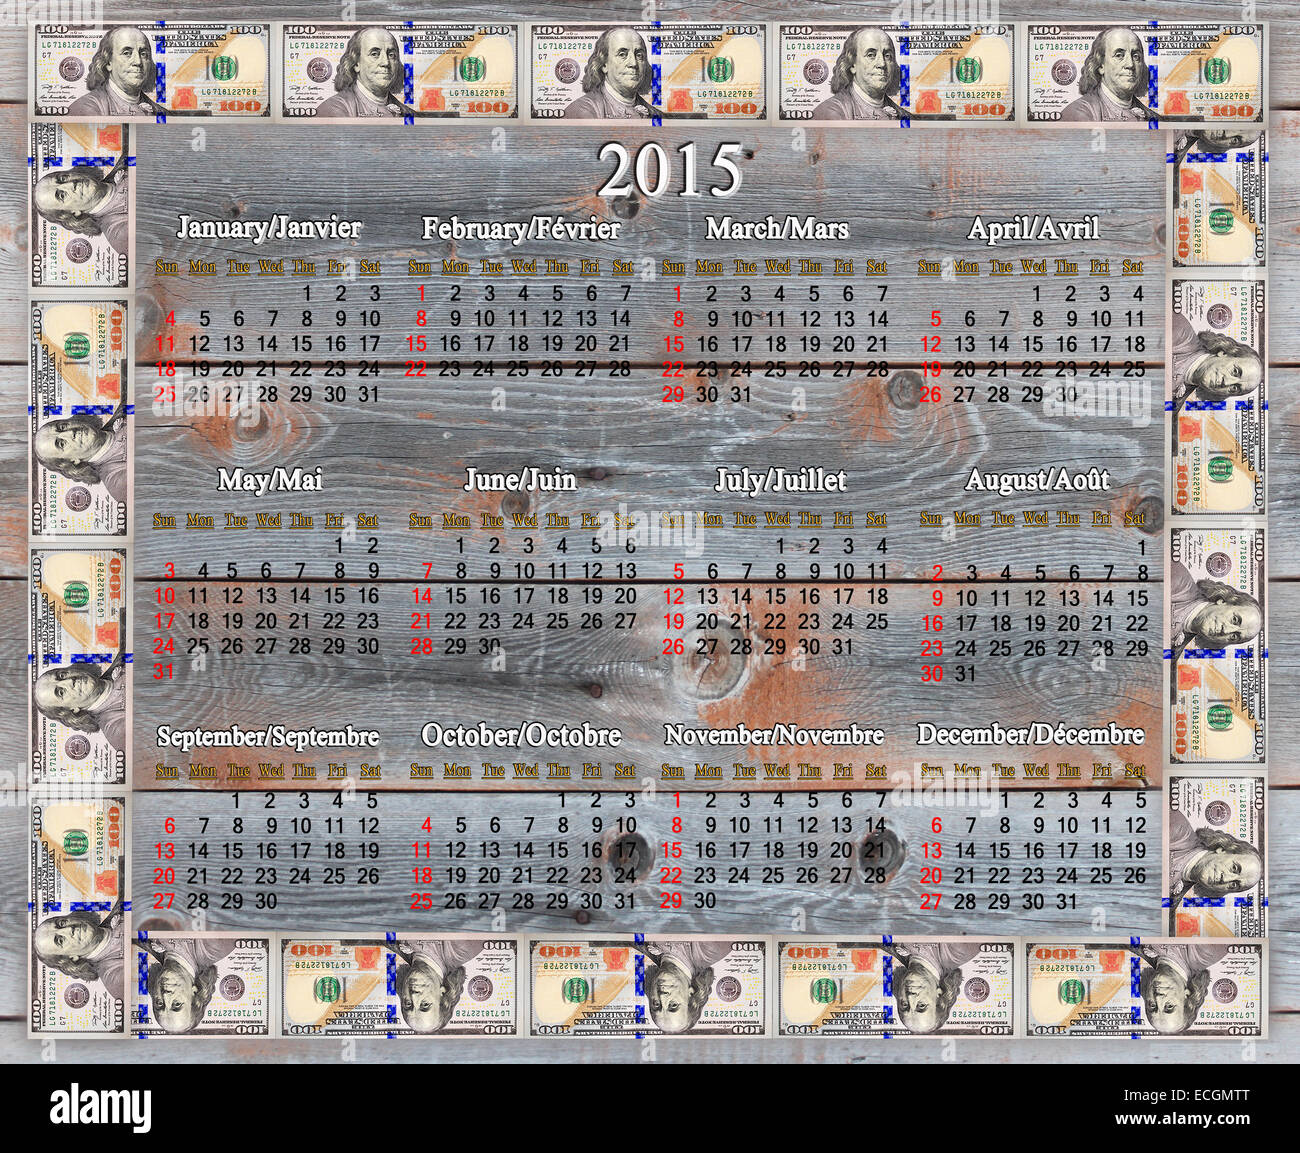 calendar for 2015 year in the American dollars' frame on the wooden board Stock Photo